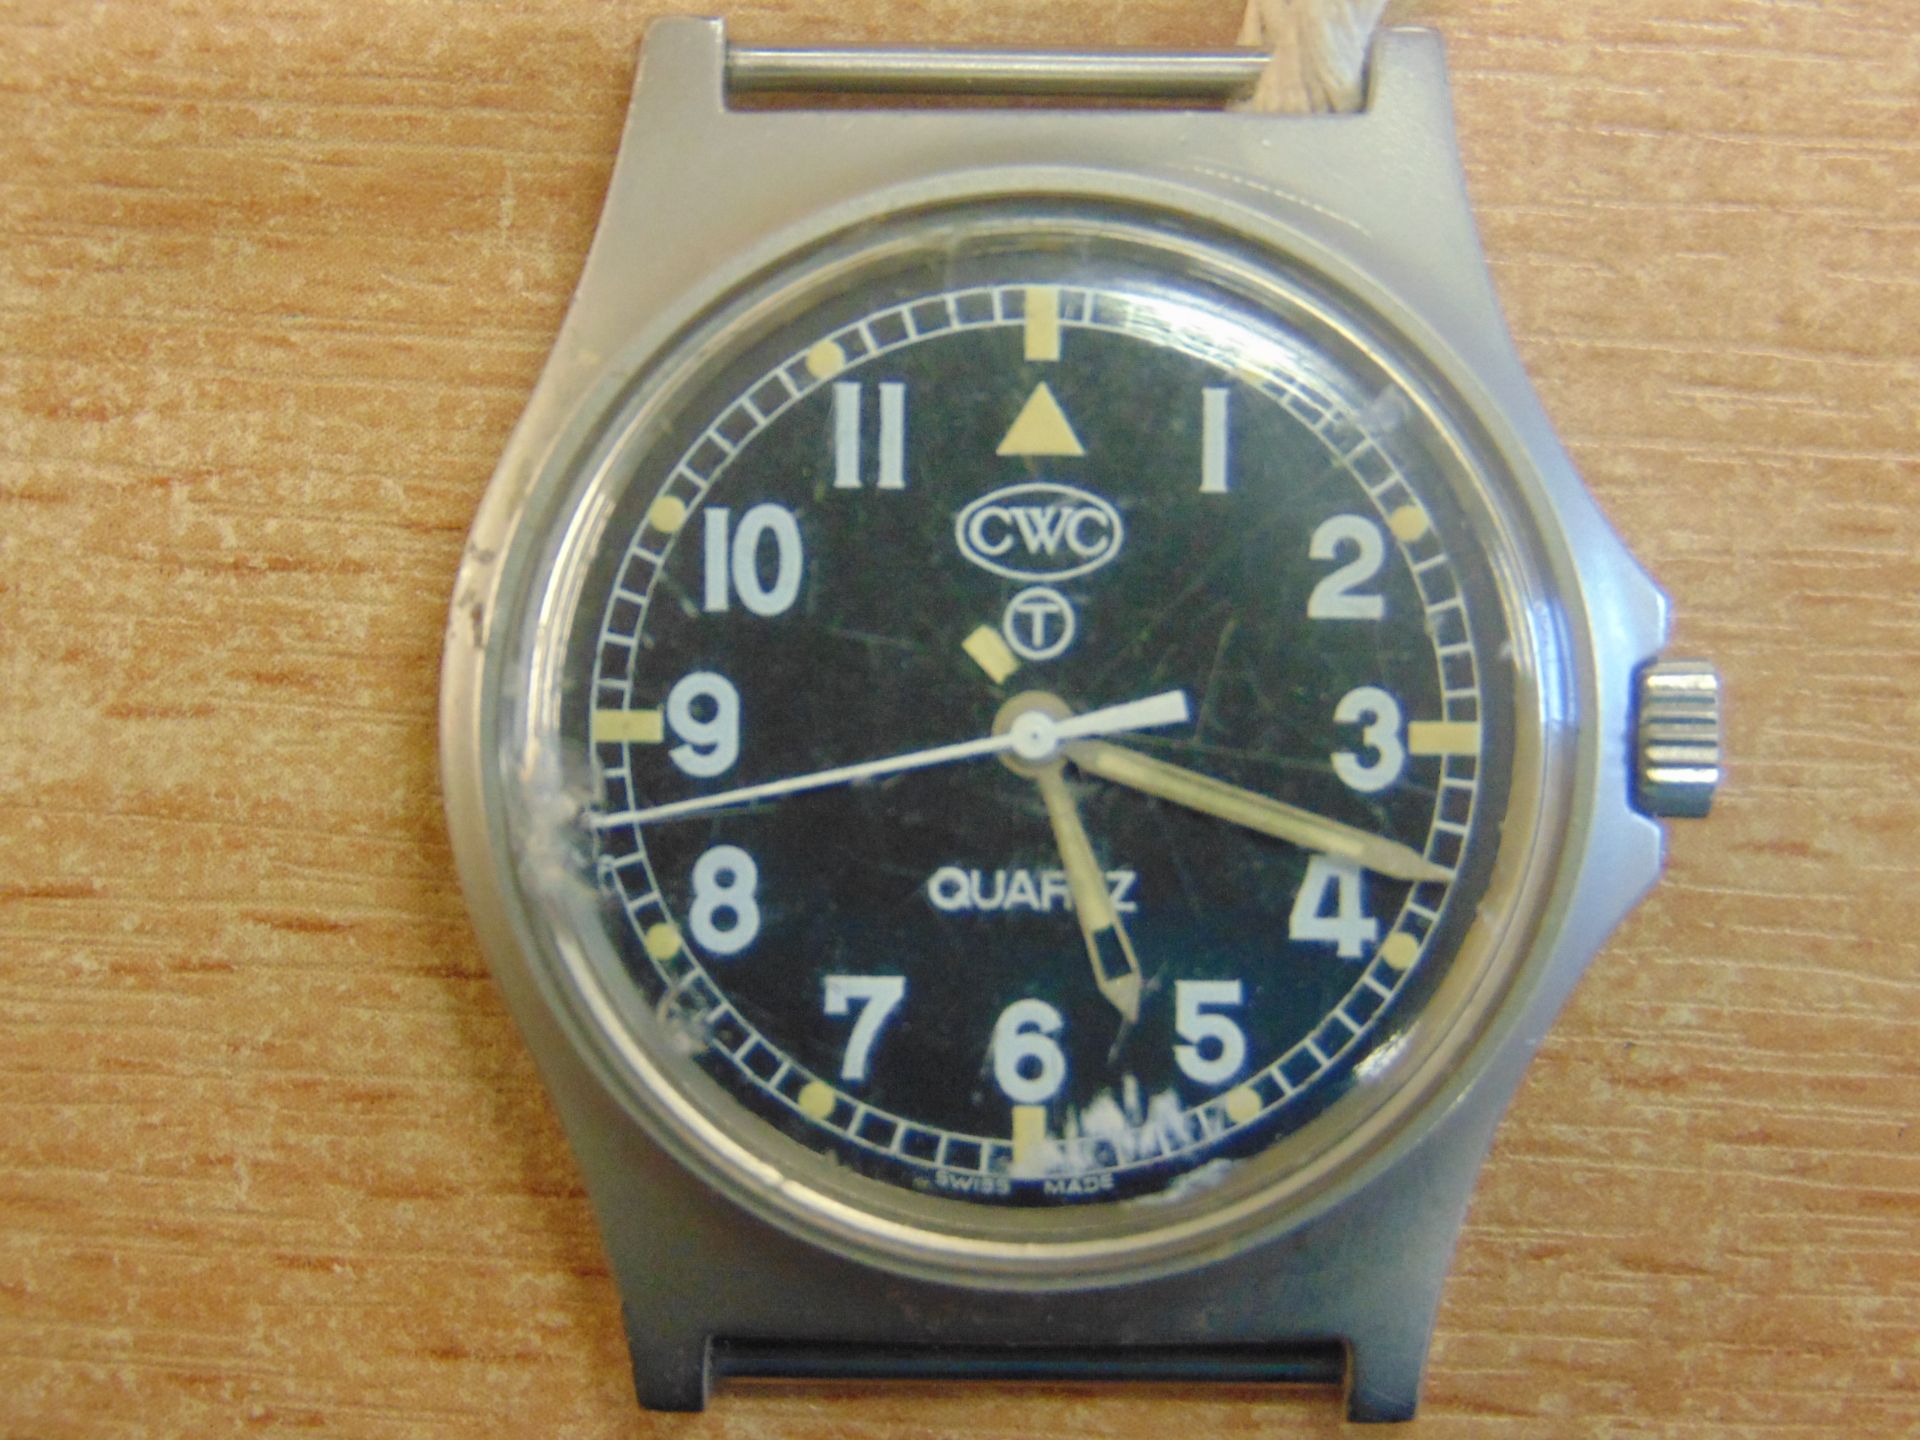 CWC W10 BRITISH ARMY SERVICE WATCH NATO MARKS DATE 2005 WATER RESISTANT TO 5 ATM GLASS CHIPPED - Bild 3 aus 6